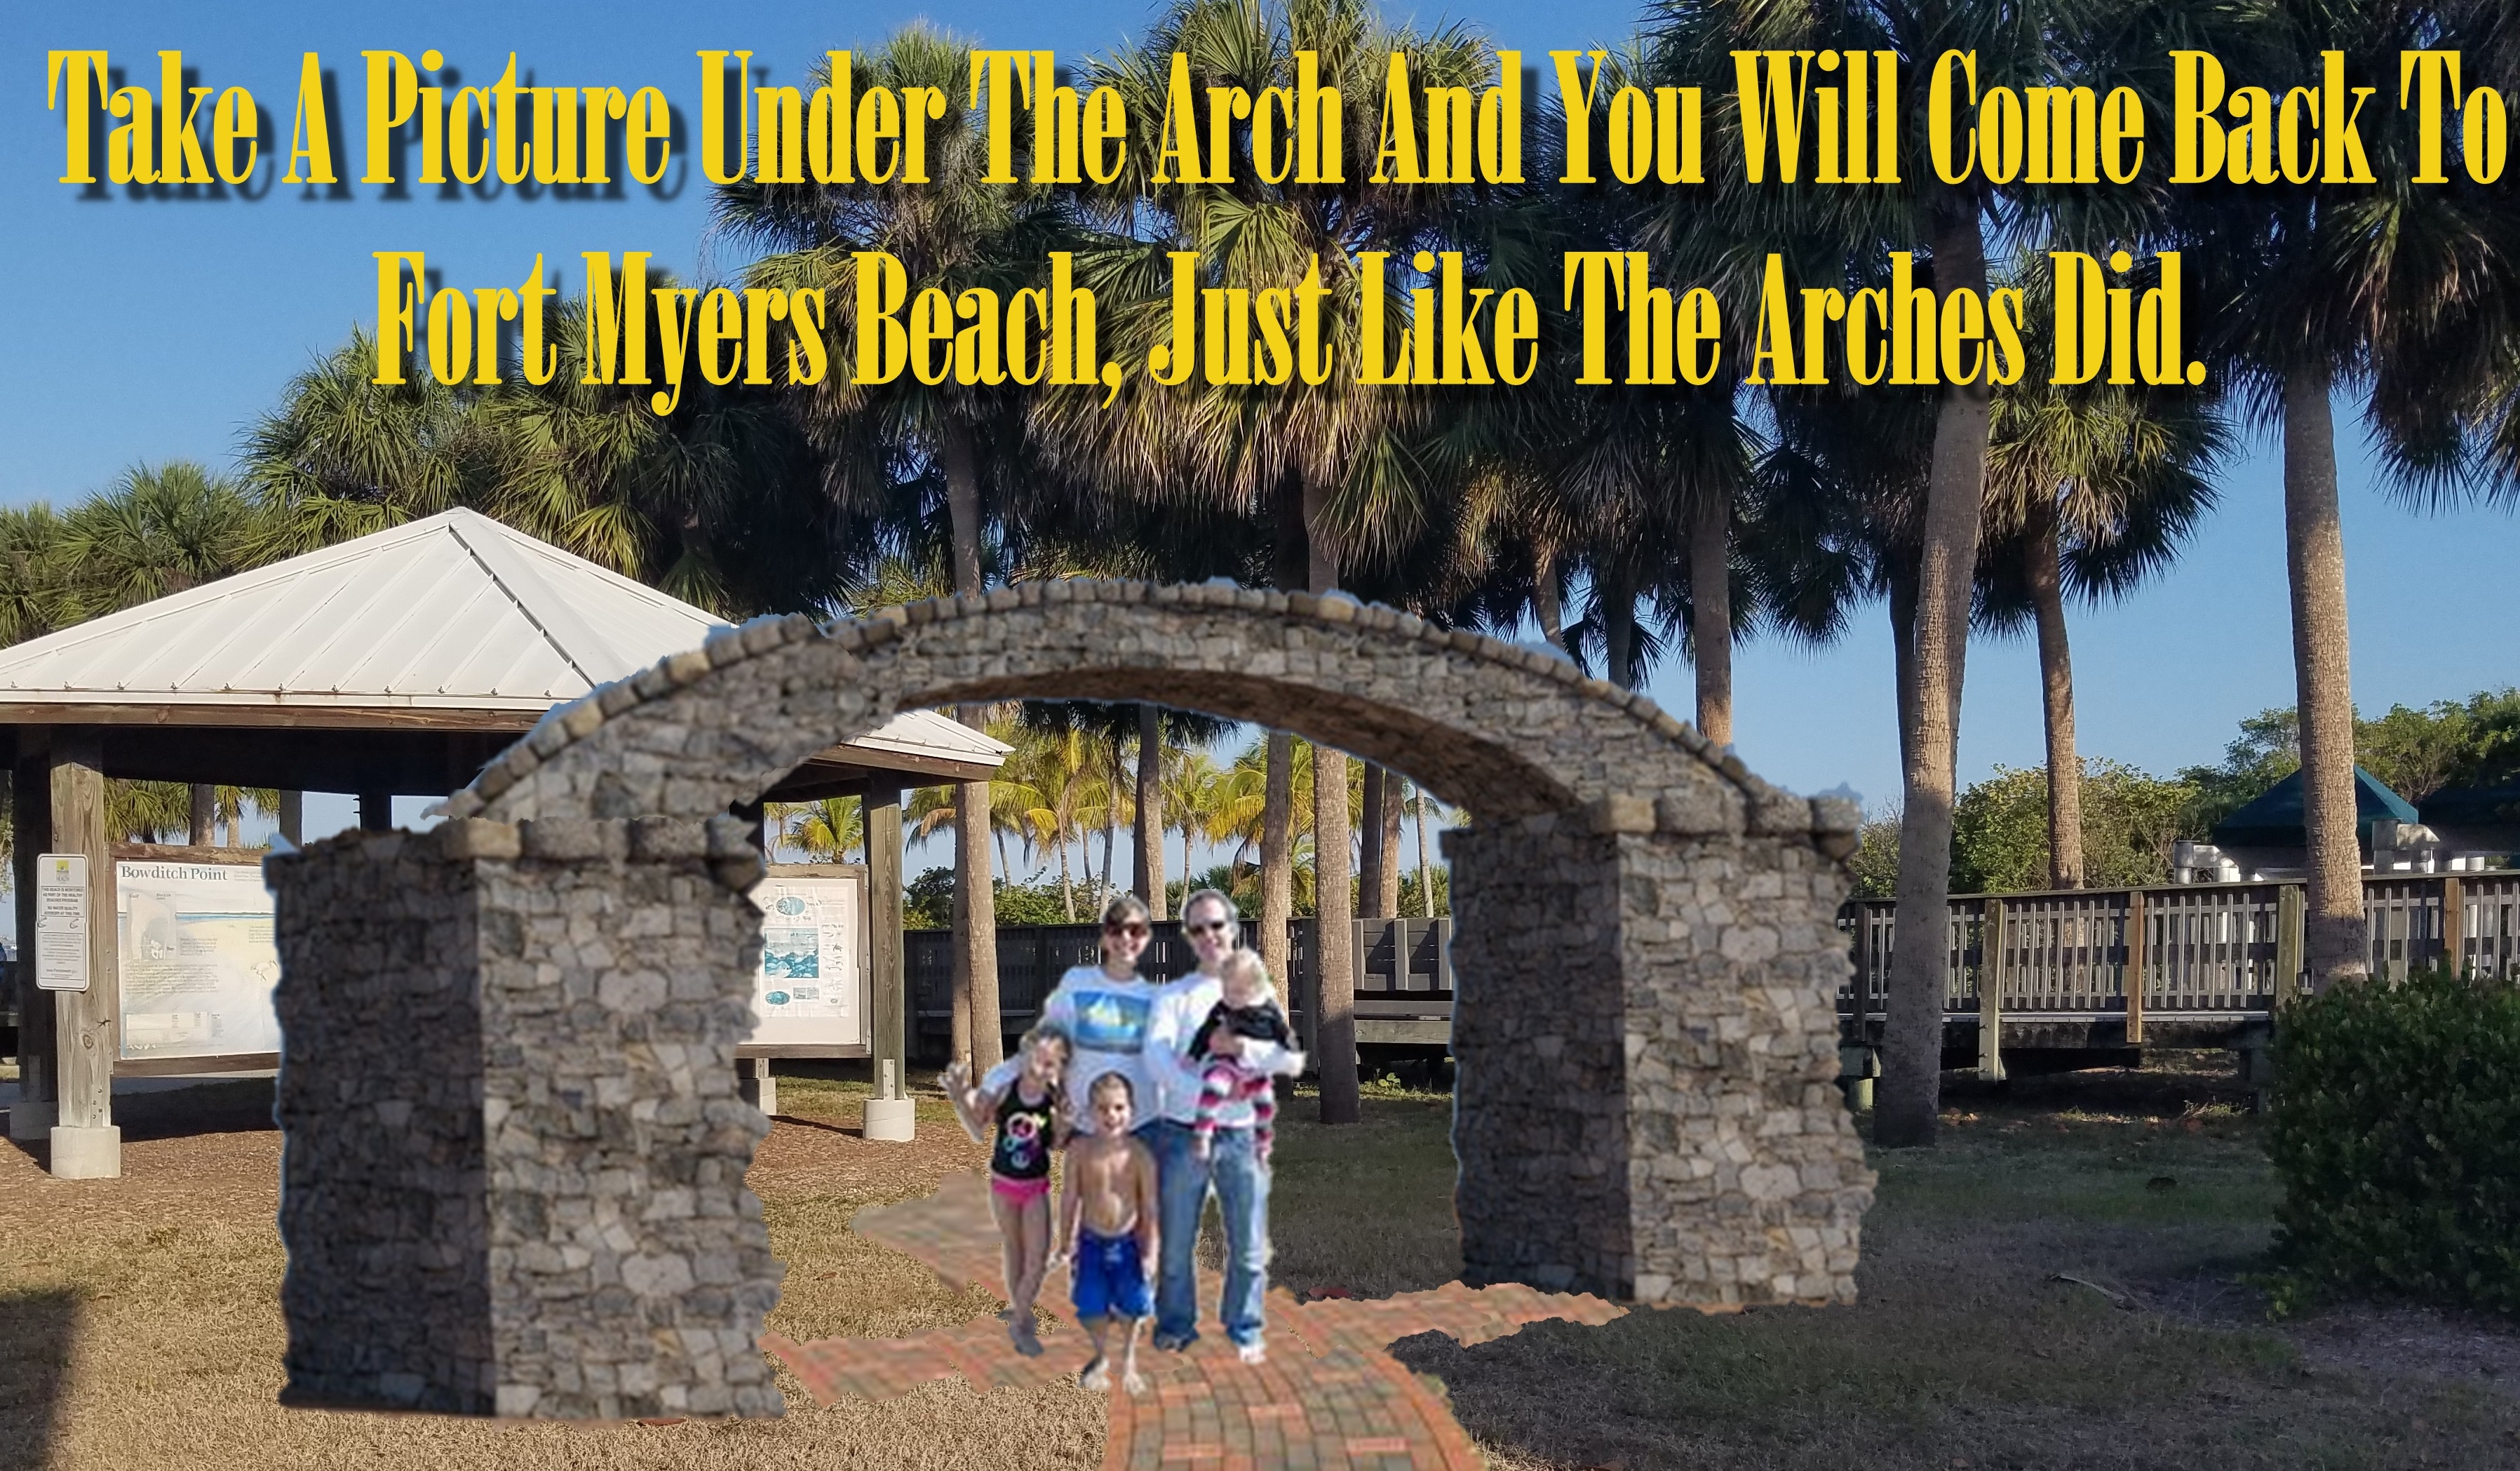 Restore Fort Myers Beach Arches Walk The Arches